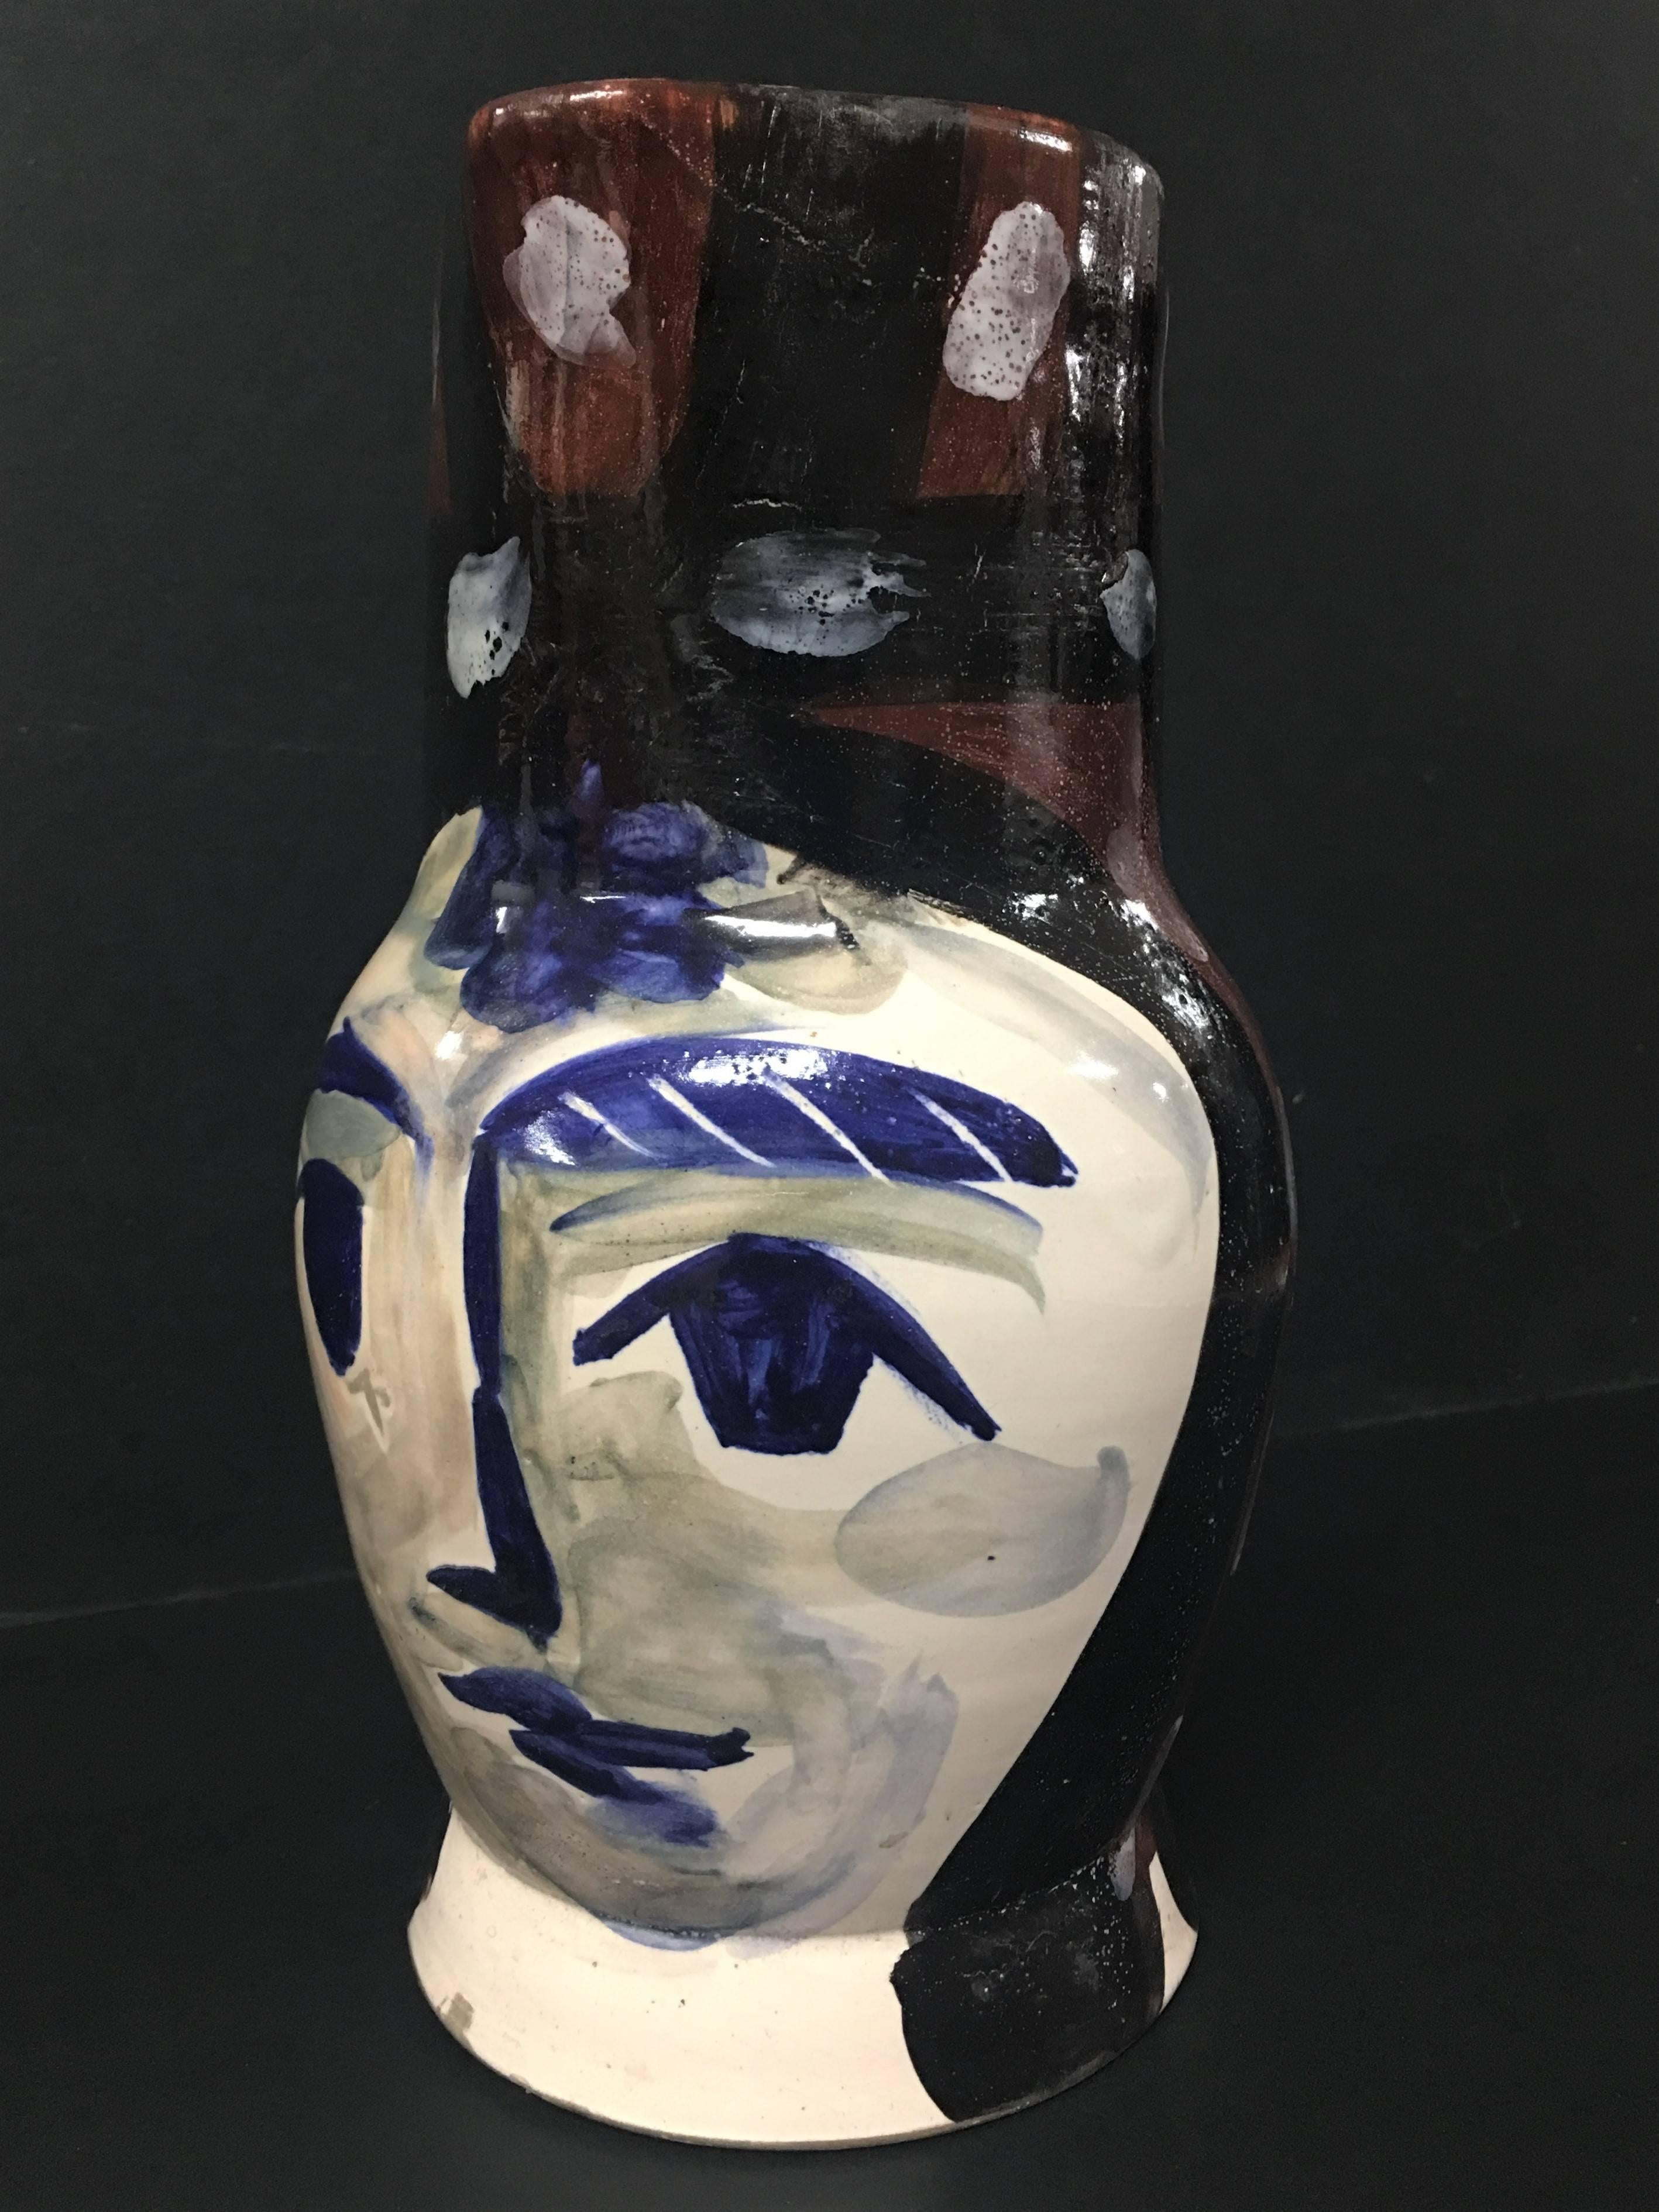 This piece is an A.R. turned pitcher created by Pablo Picasso in 1953. It is made with white earthenware clay, decoration in engobes and oxides under partial brushed glaze with white enamel spots in blue, red, white, brown, and black. It bears the